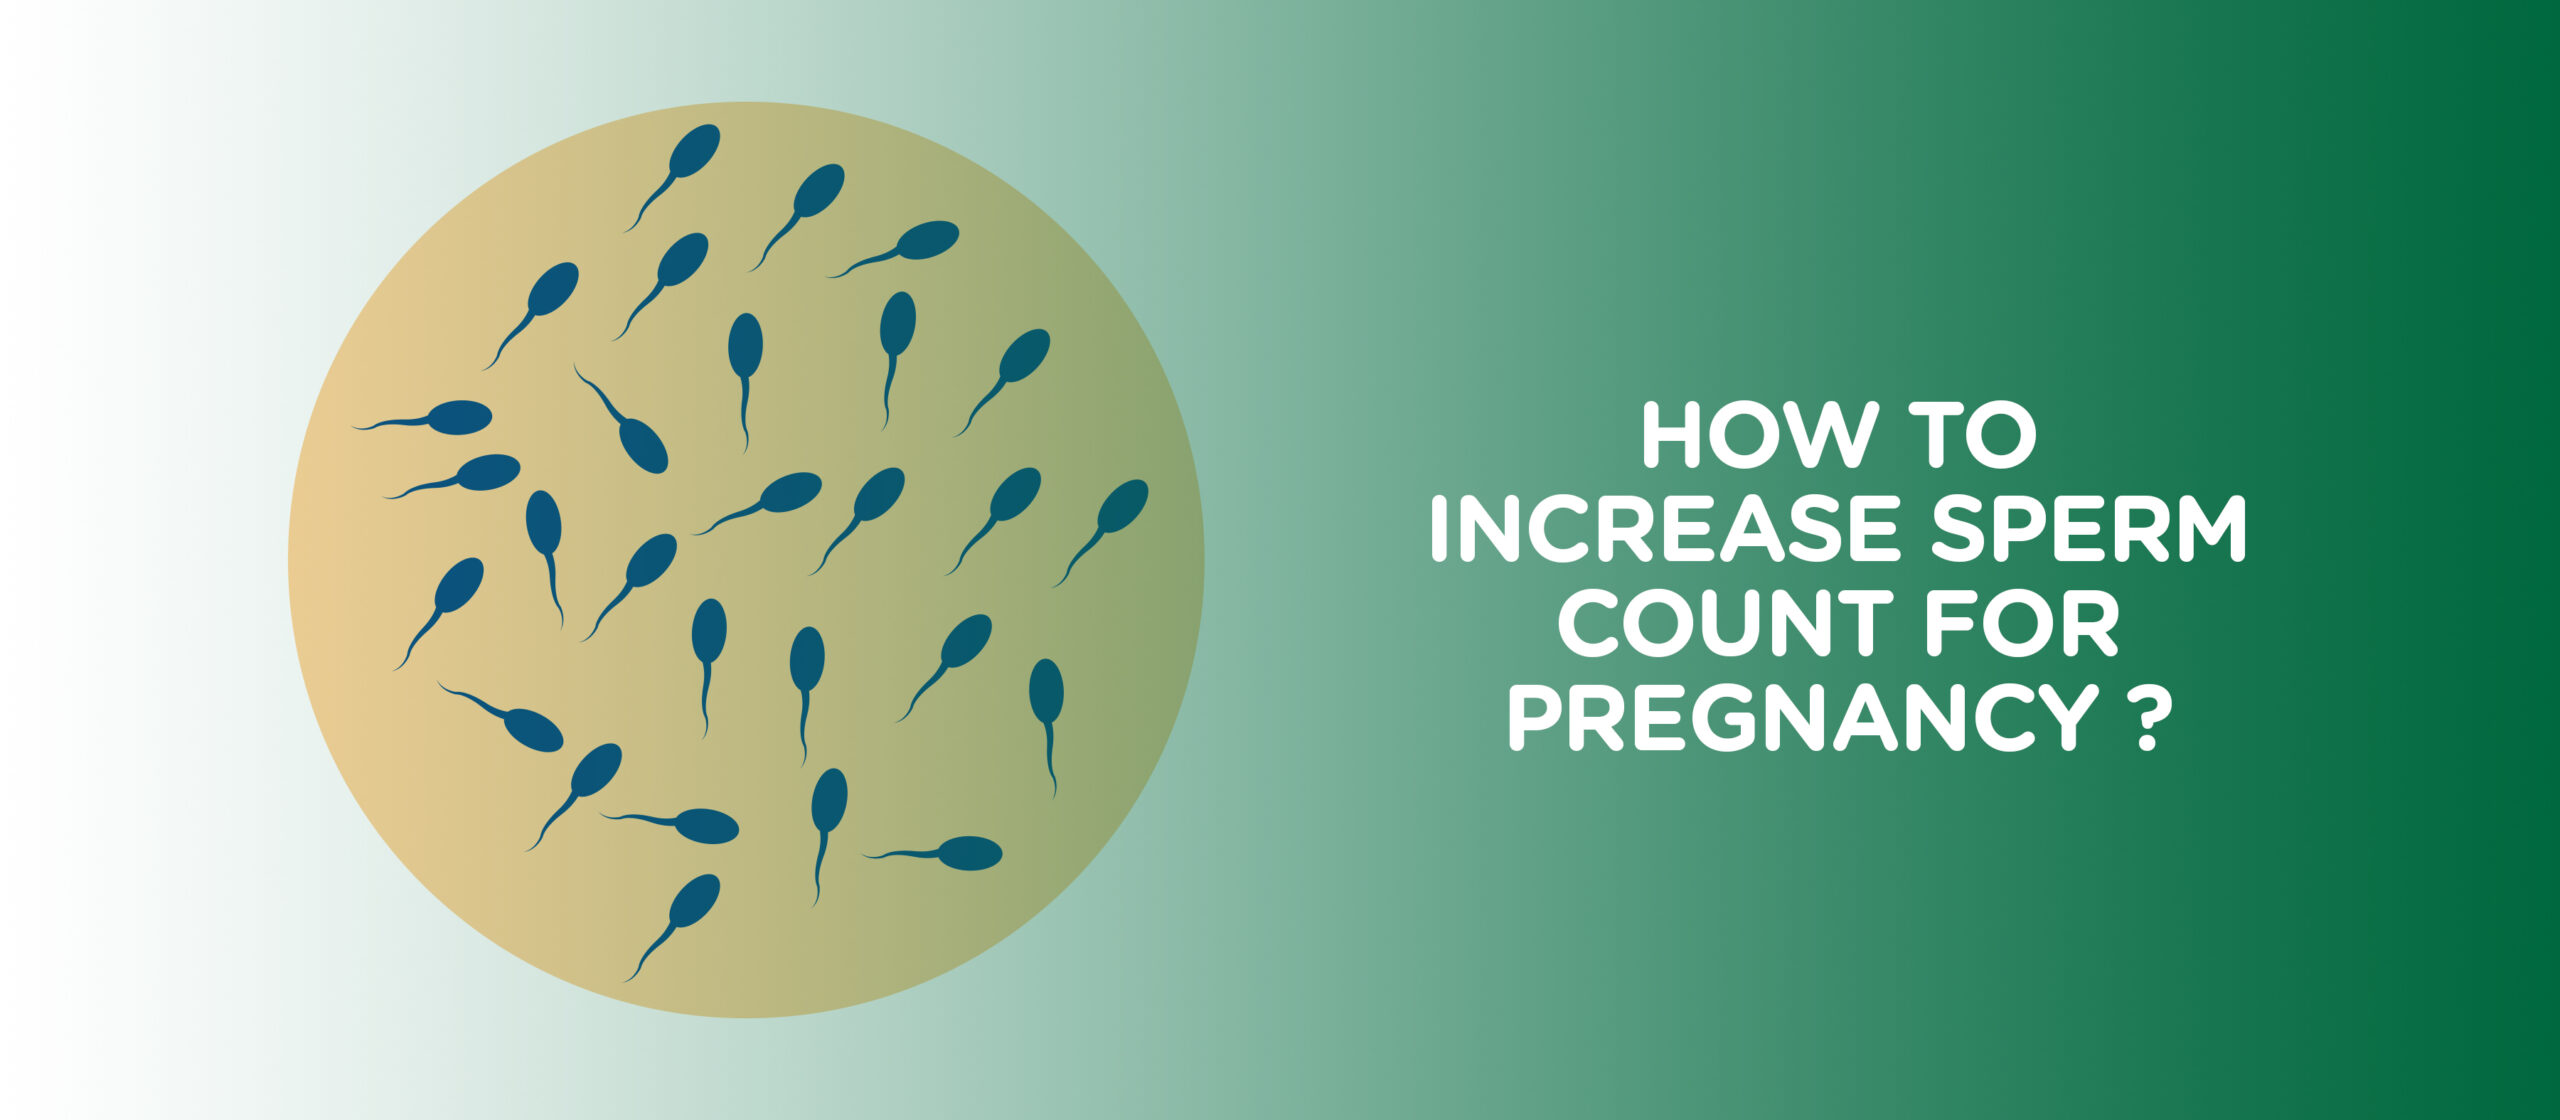 How-to-increase-sperm-count-1-scaled.jpg